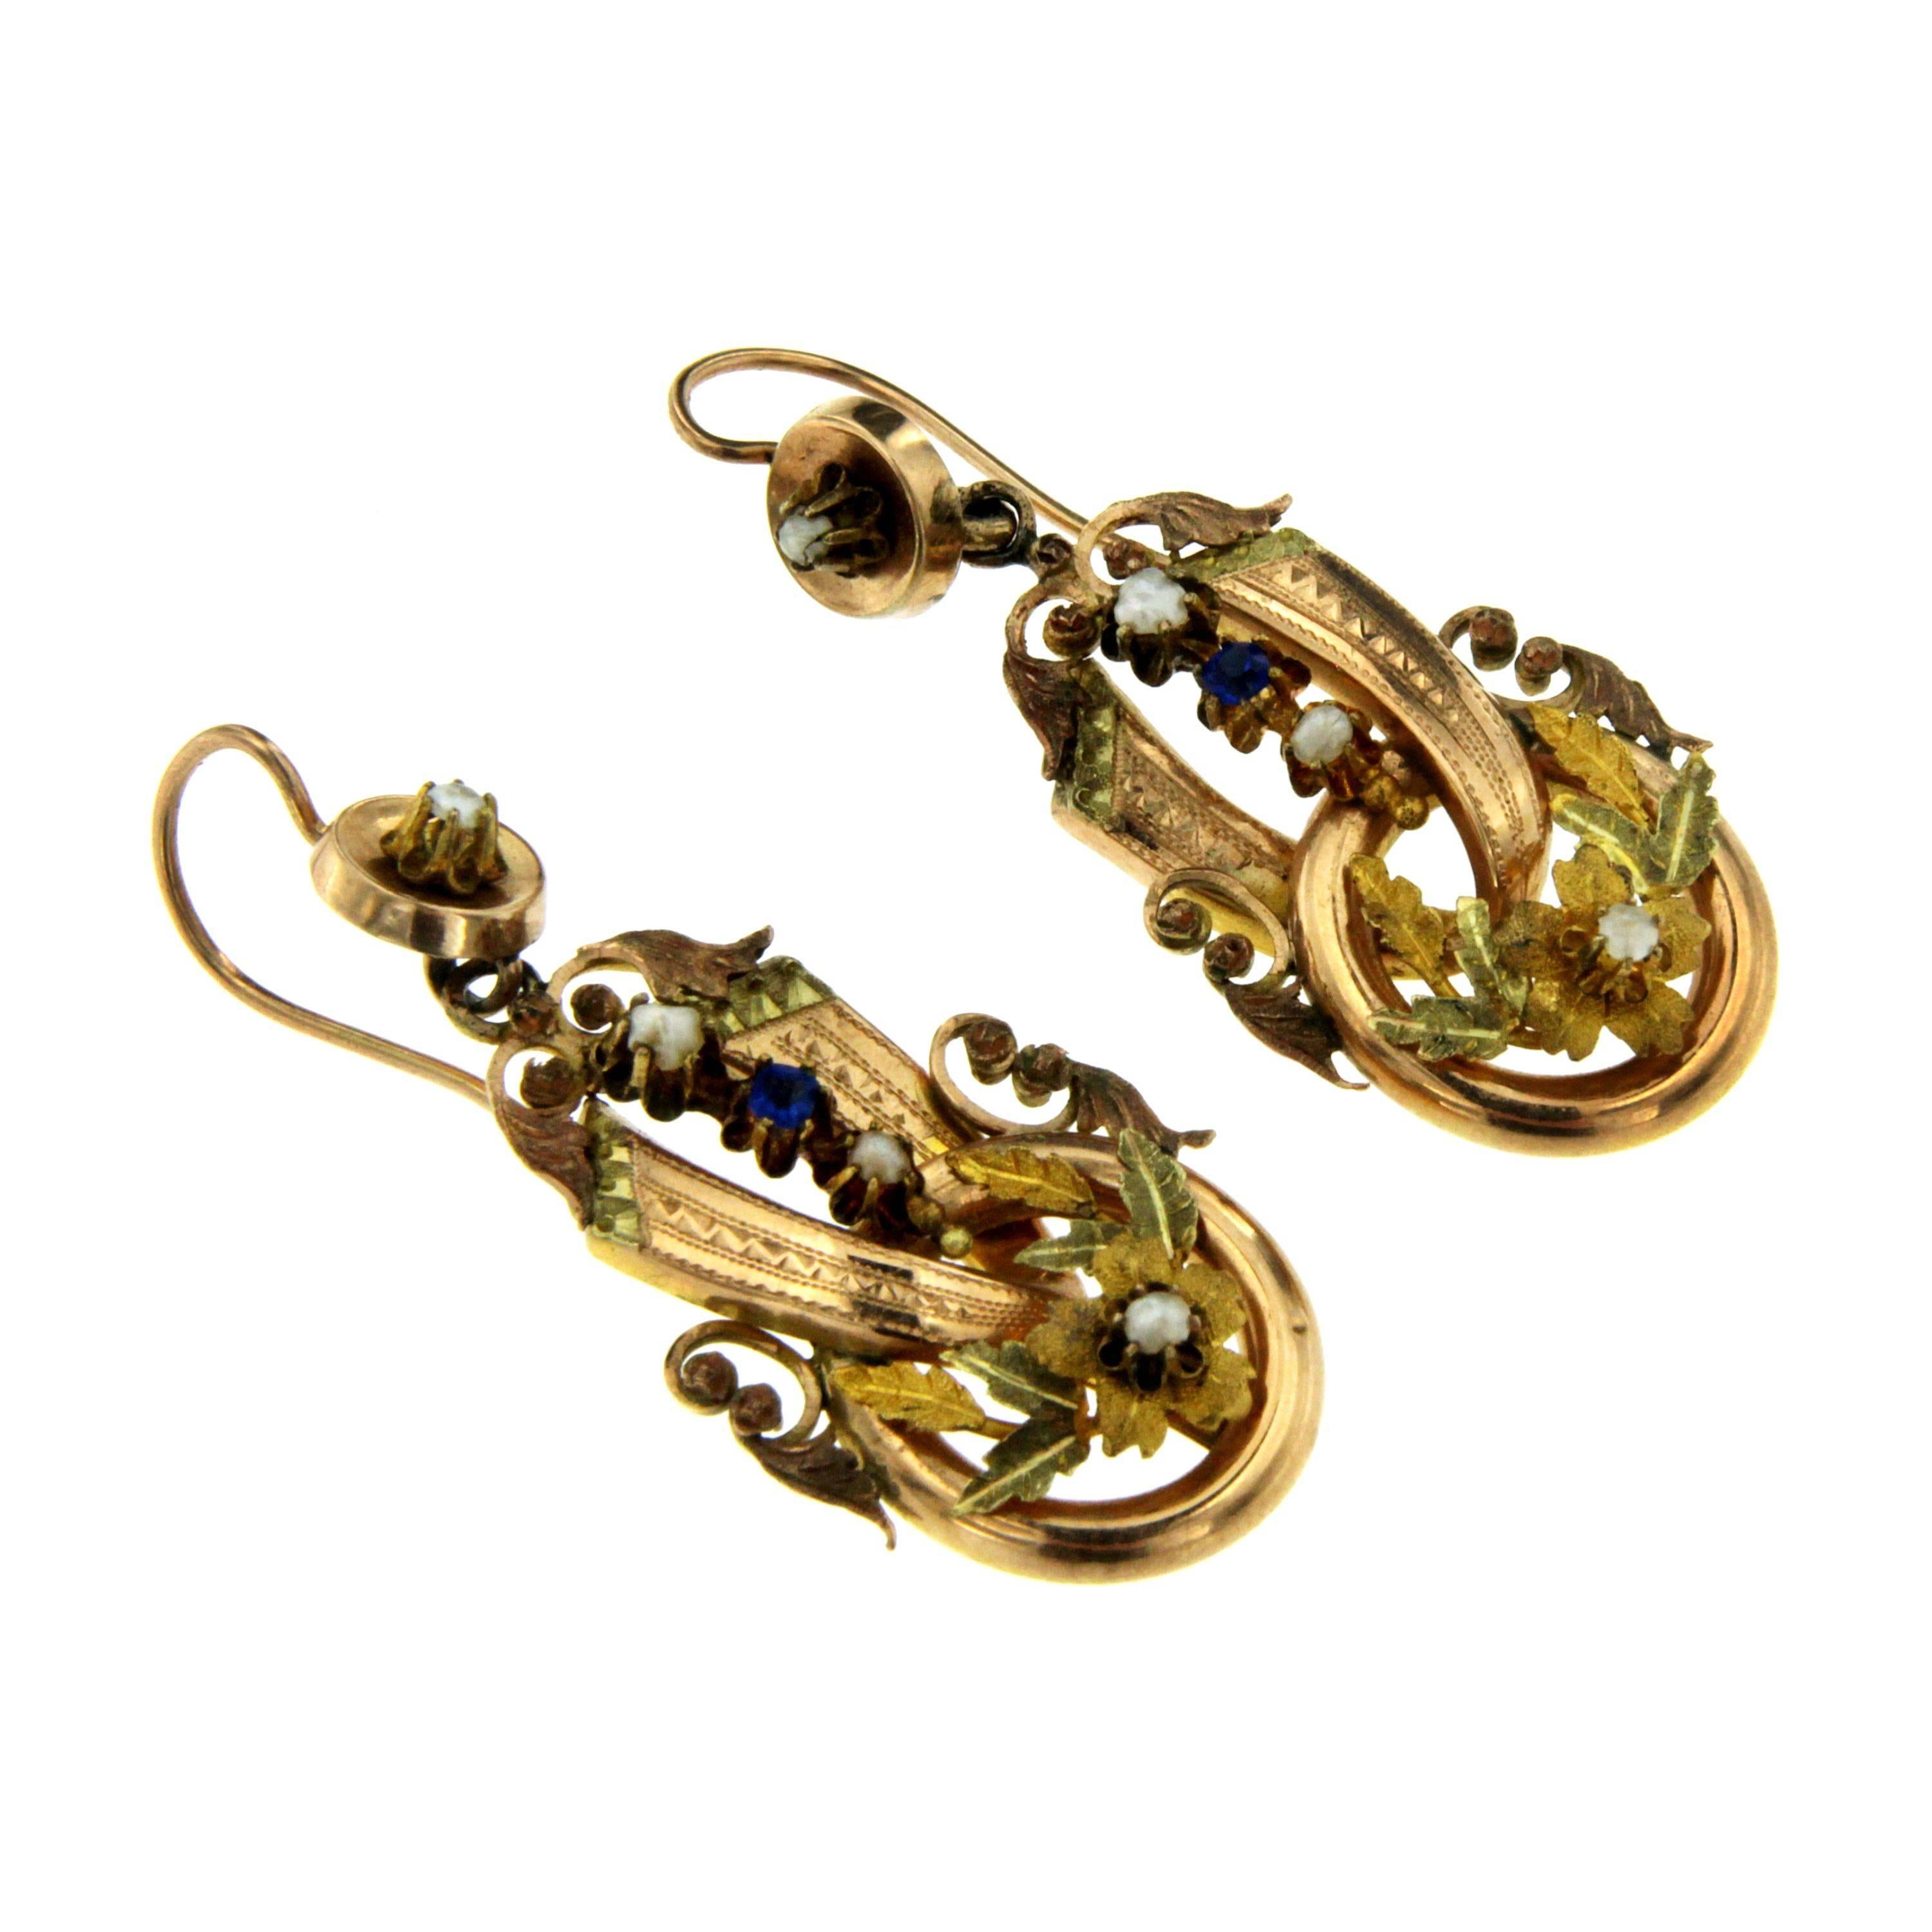 A superb pair of Neapolitan drop earrings, made circa 1800 in Naples, Italy.
These highly collectable earrings are set with two gems and pearls, Totally handcrafted in the traditional way in 12k gold, the leaves are in 22k gold. 

CONDITION: